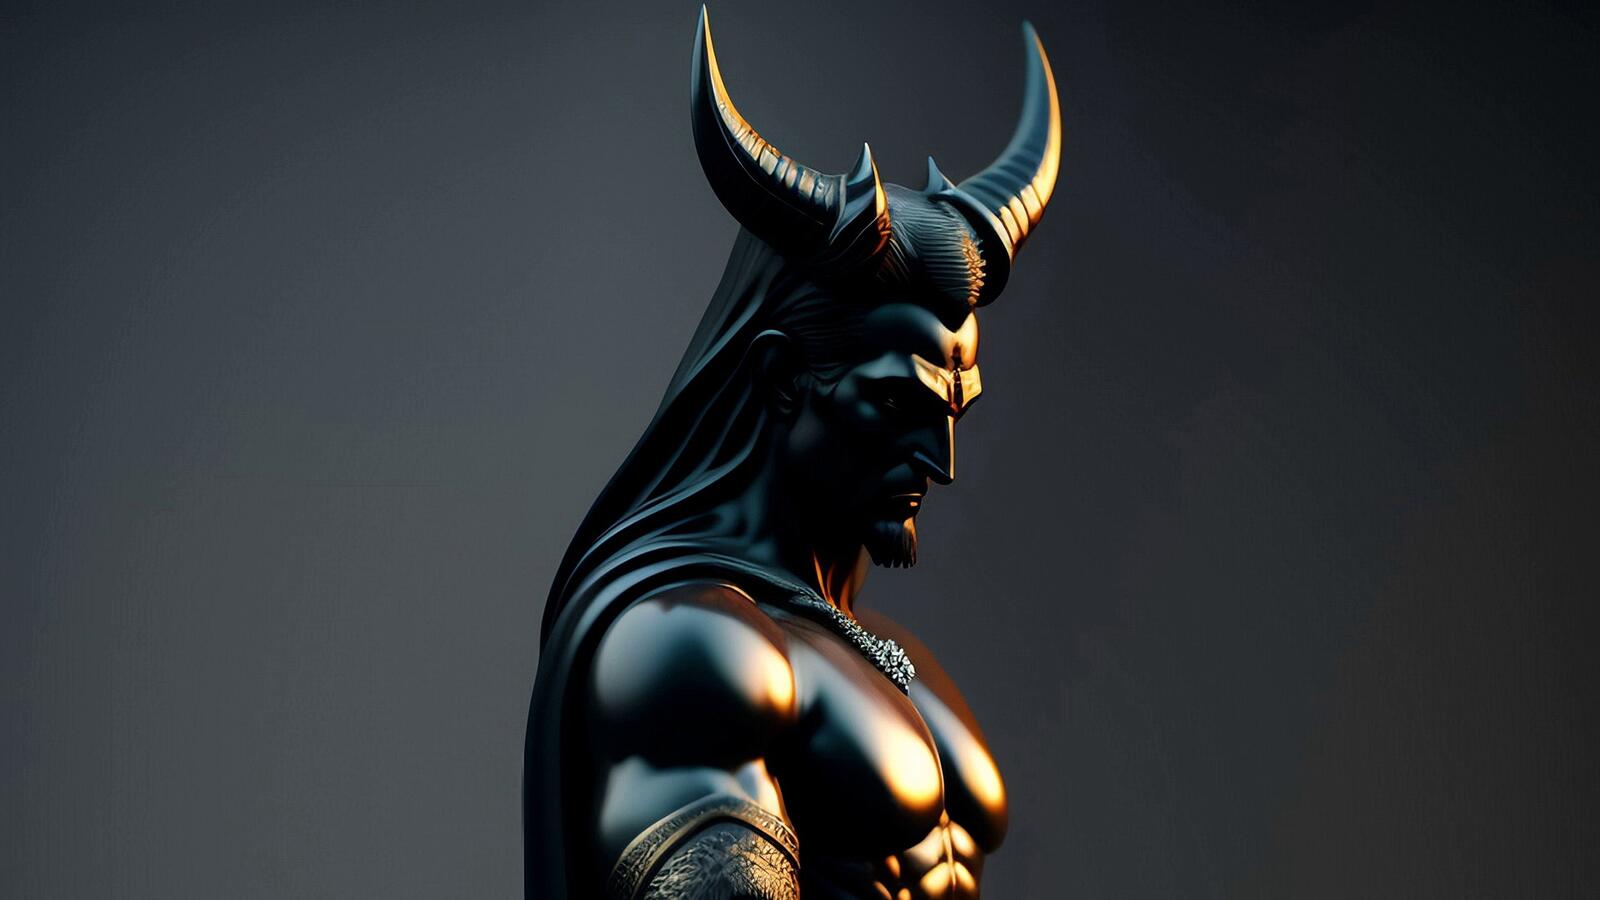 Free photo Sculpture of a demon with horns on a gray background